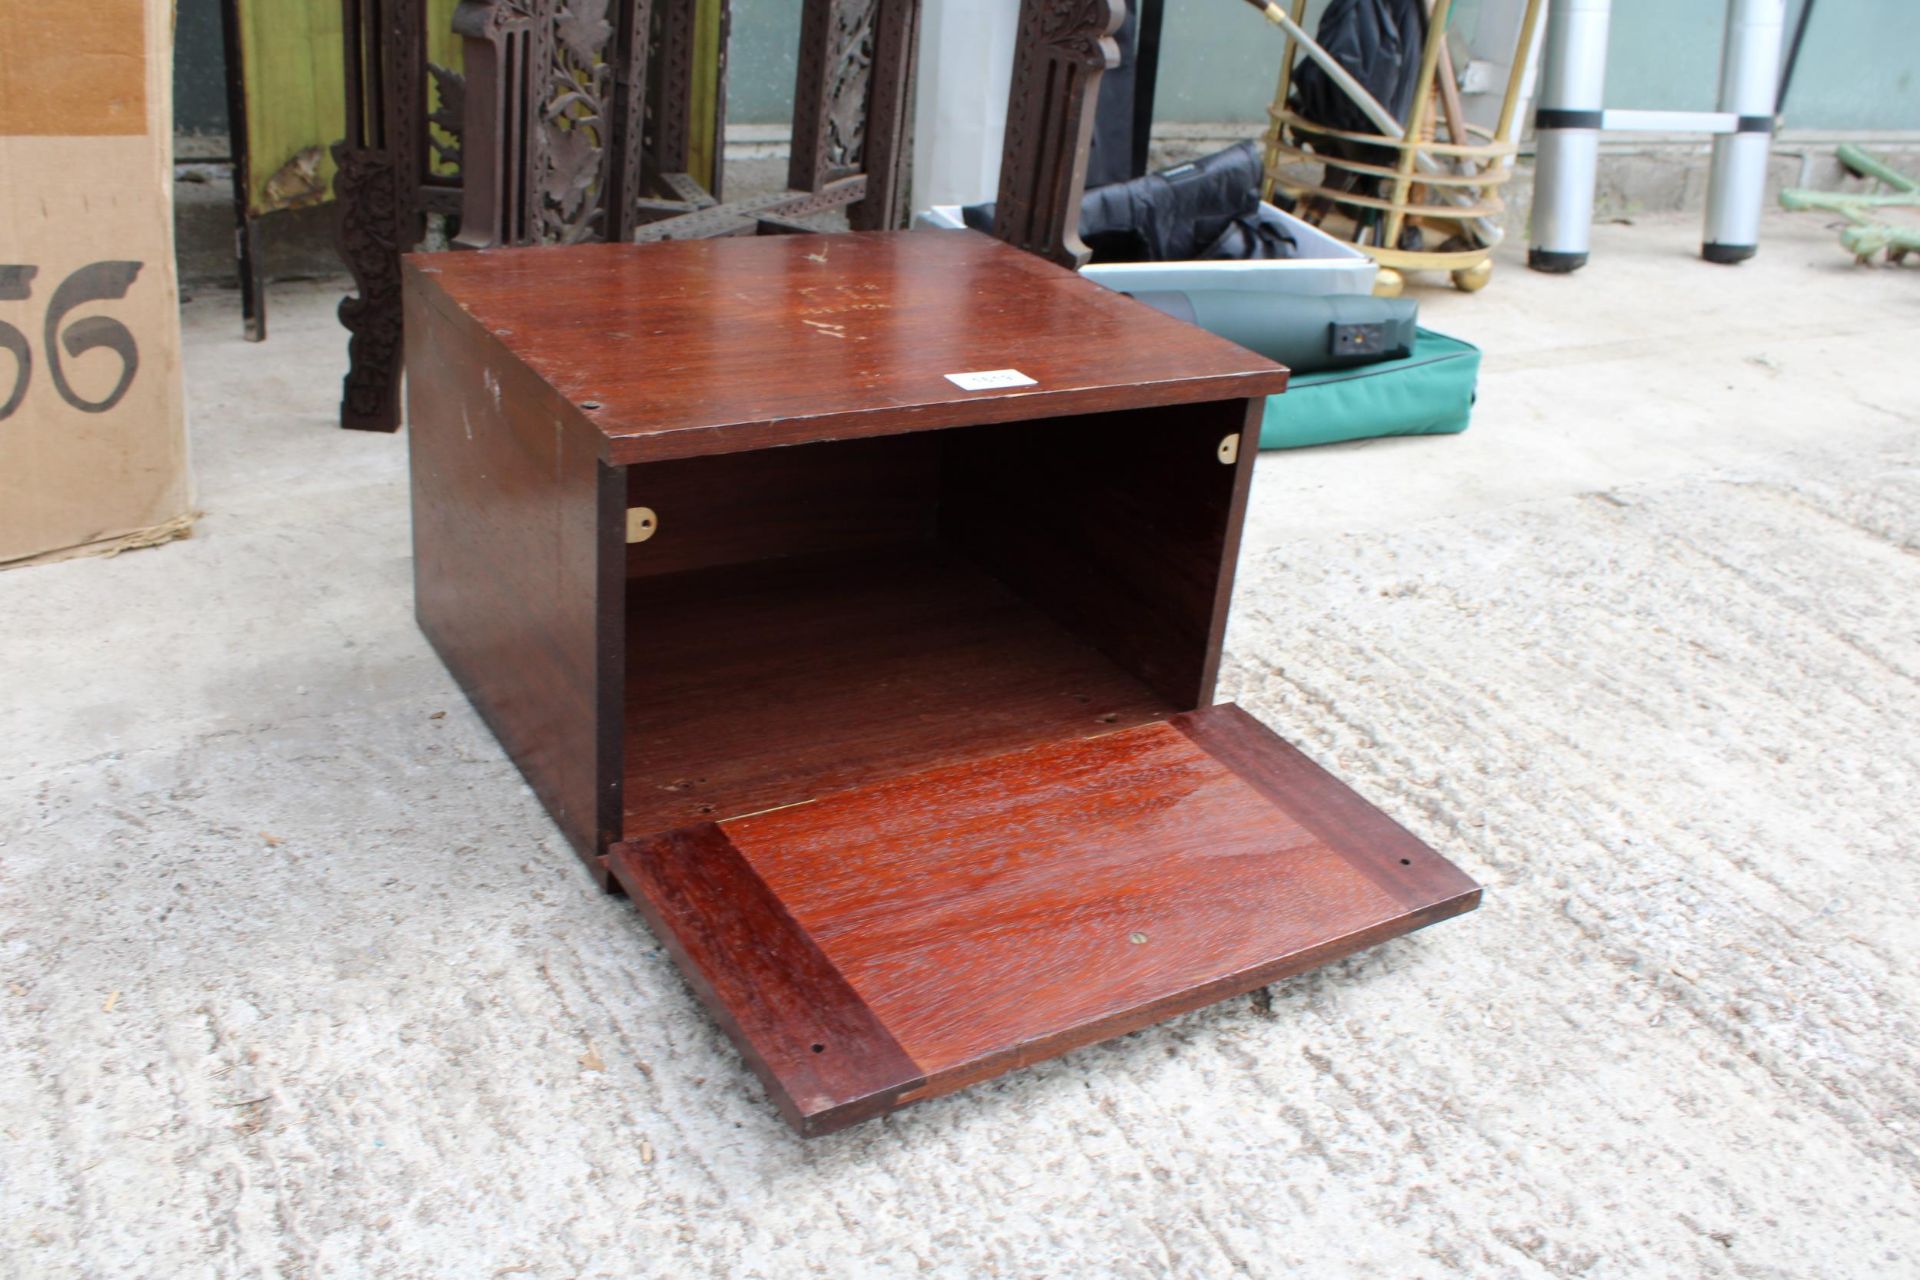 A TWO SECTION VINTAGE SCREEN, A WOODEN BOX AND A CARVED HARDWOOD TABLE BASE - Image 4 of 4